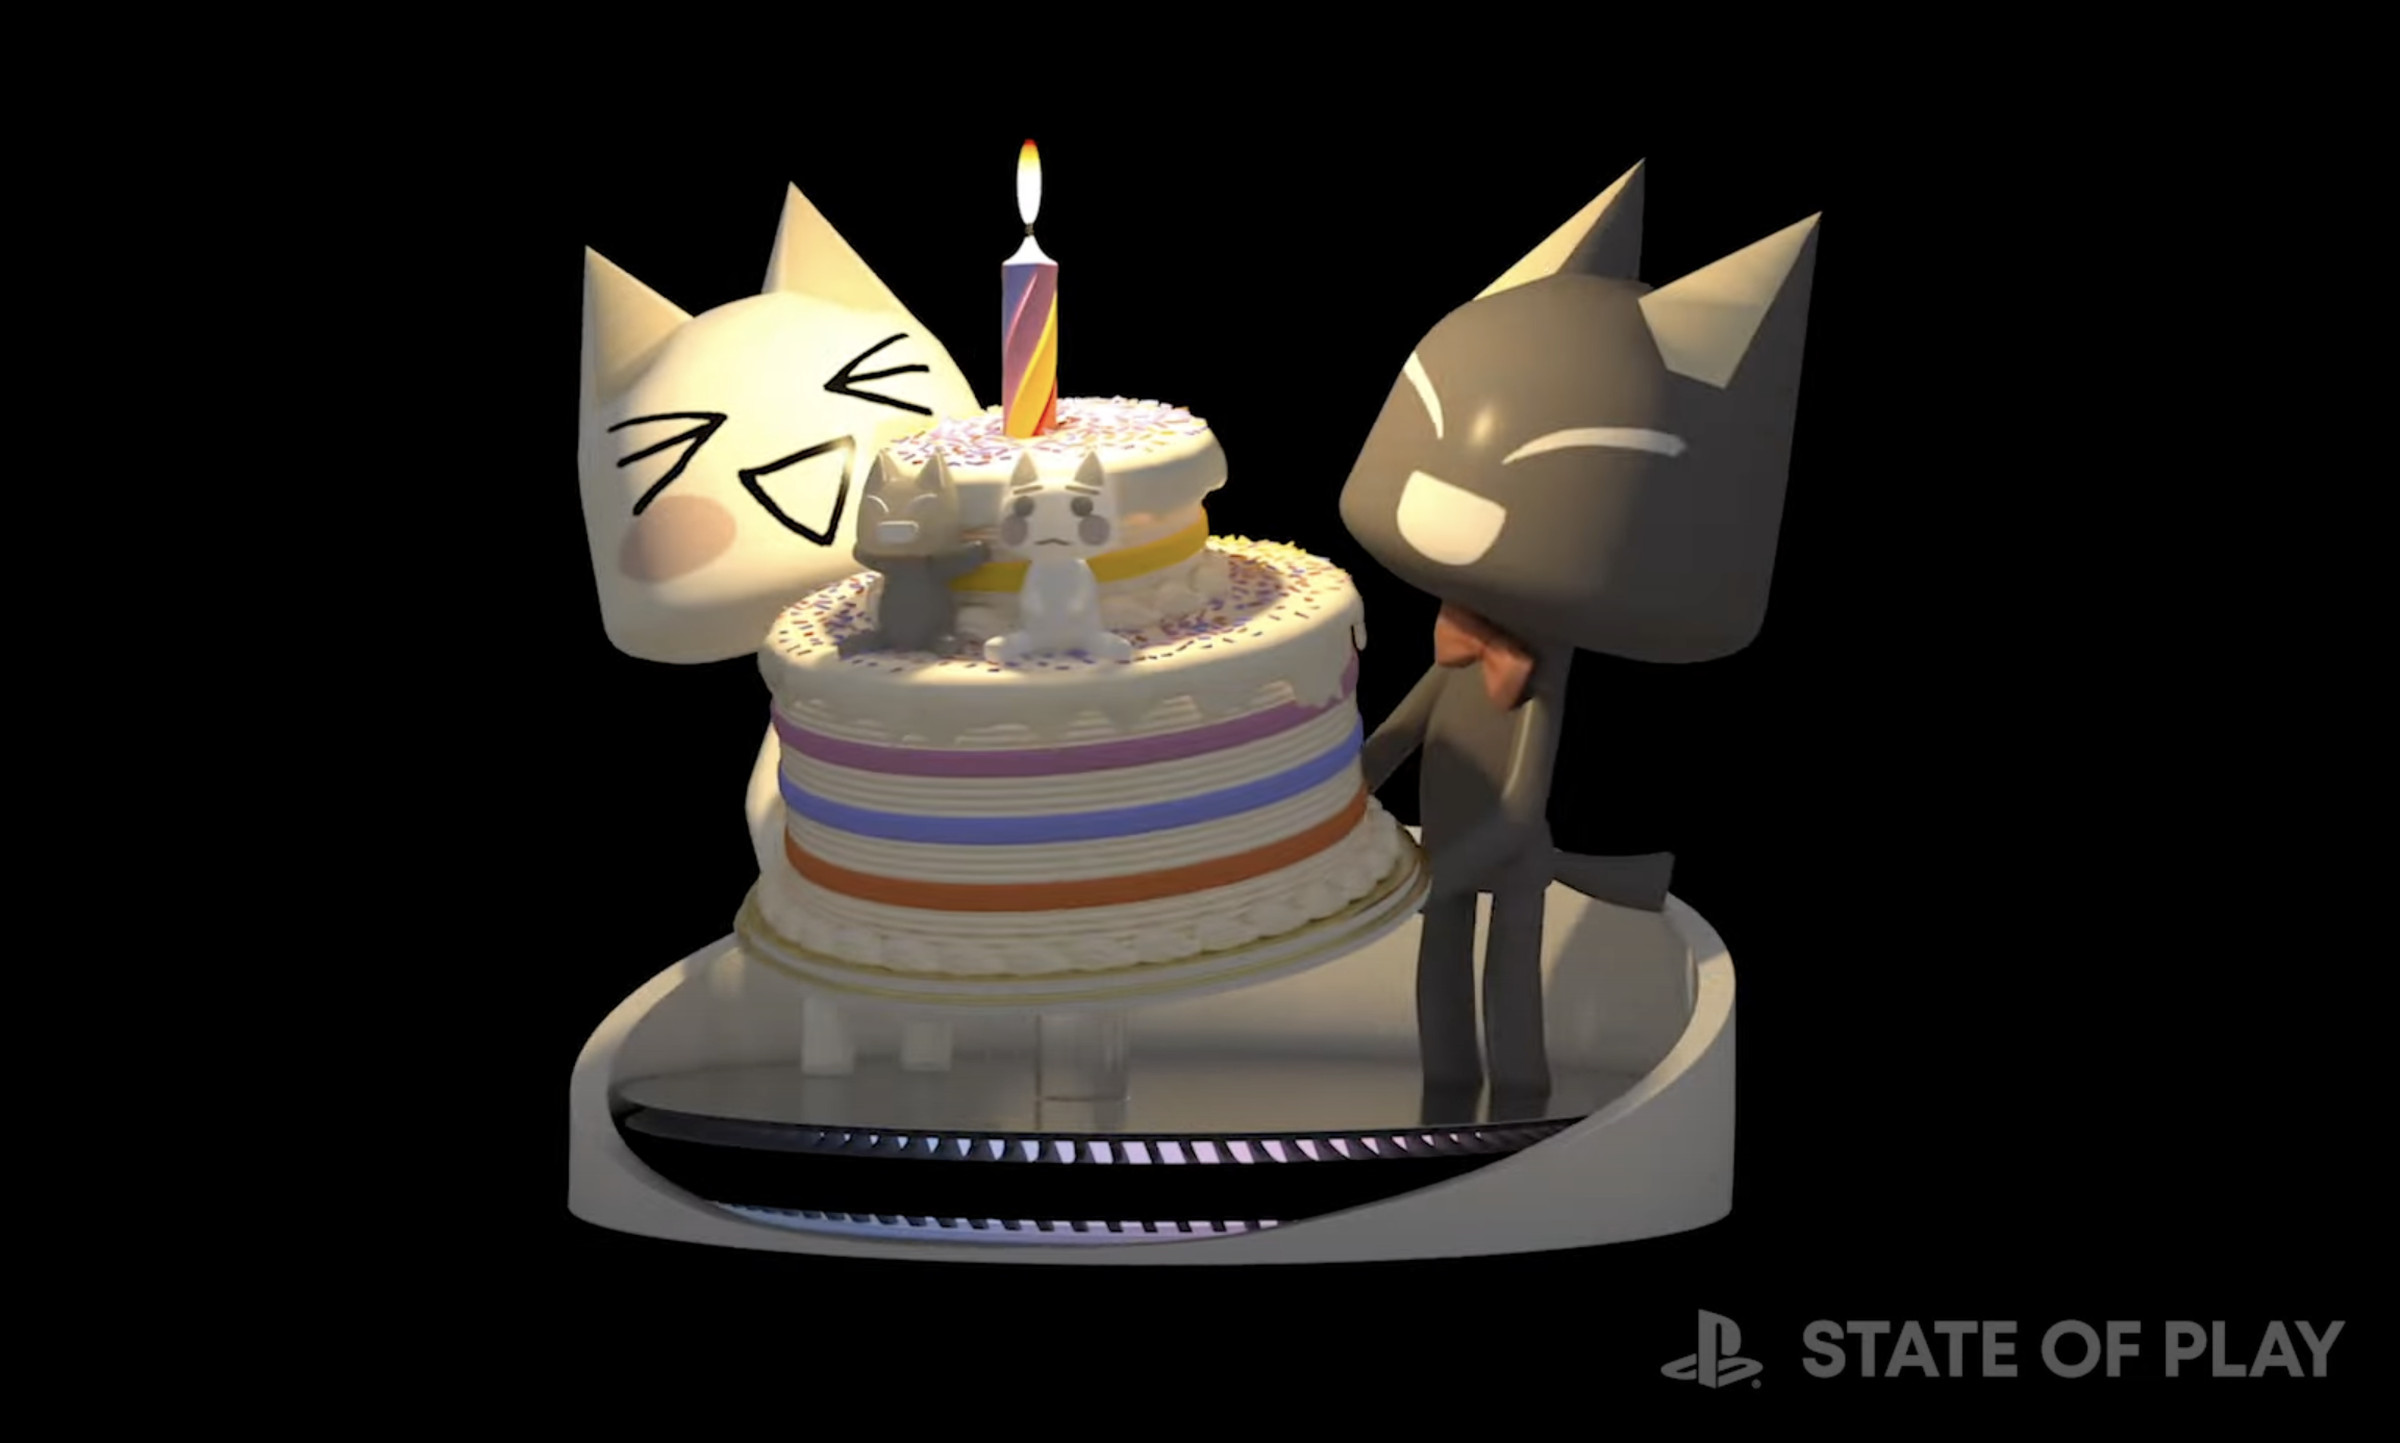 Image of a digital statue of two cats, holding a birthday cake together.